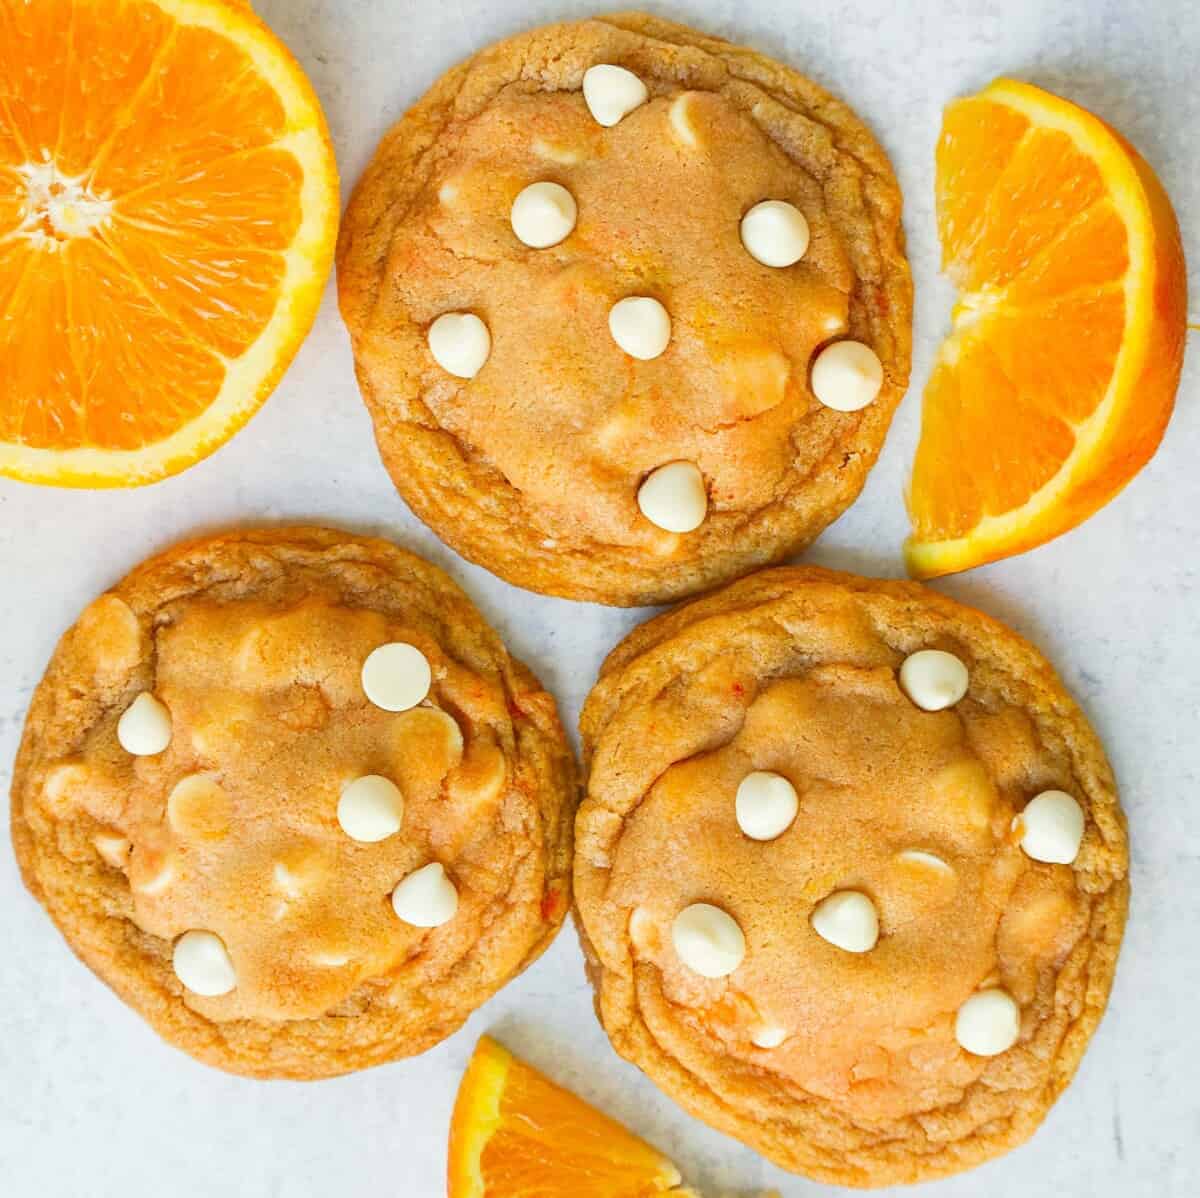 Orange cookies with white chocolate chips and orange slices are a unique twist on the classic cookie recipes.